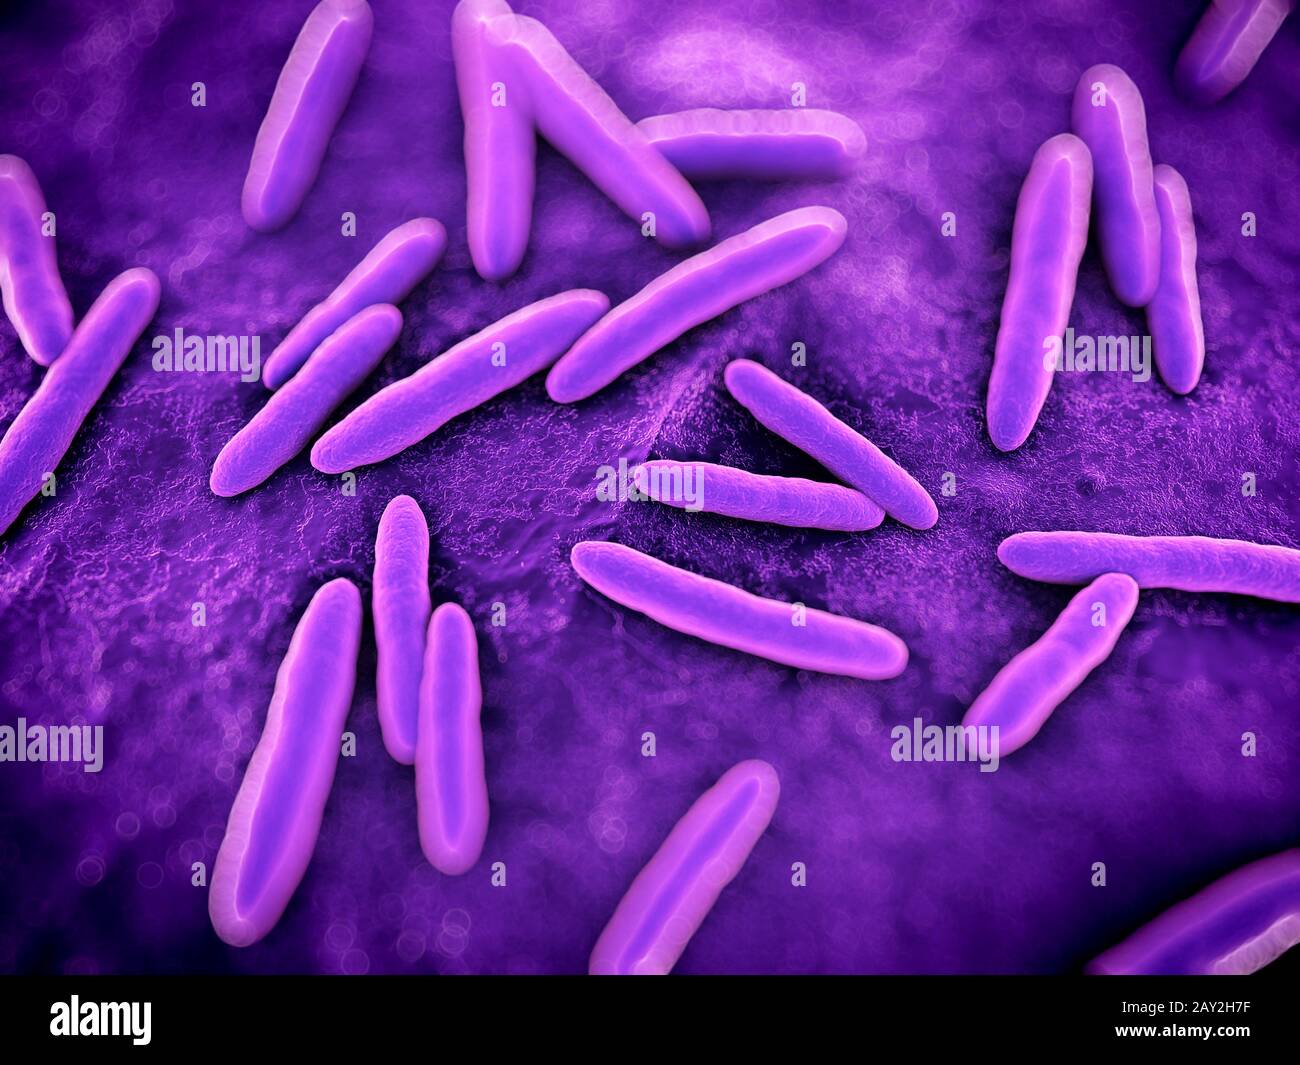 3d rendered scientific illustration of some bacteria Stock Photo